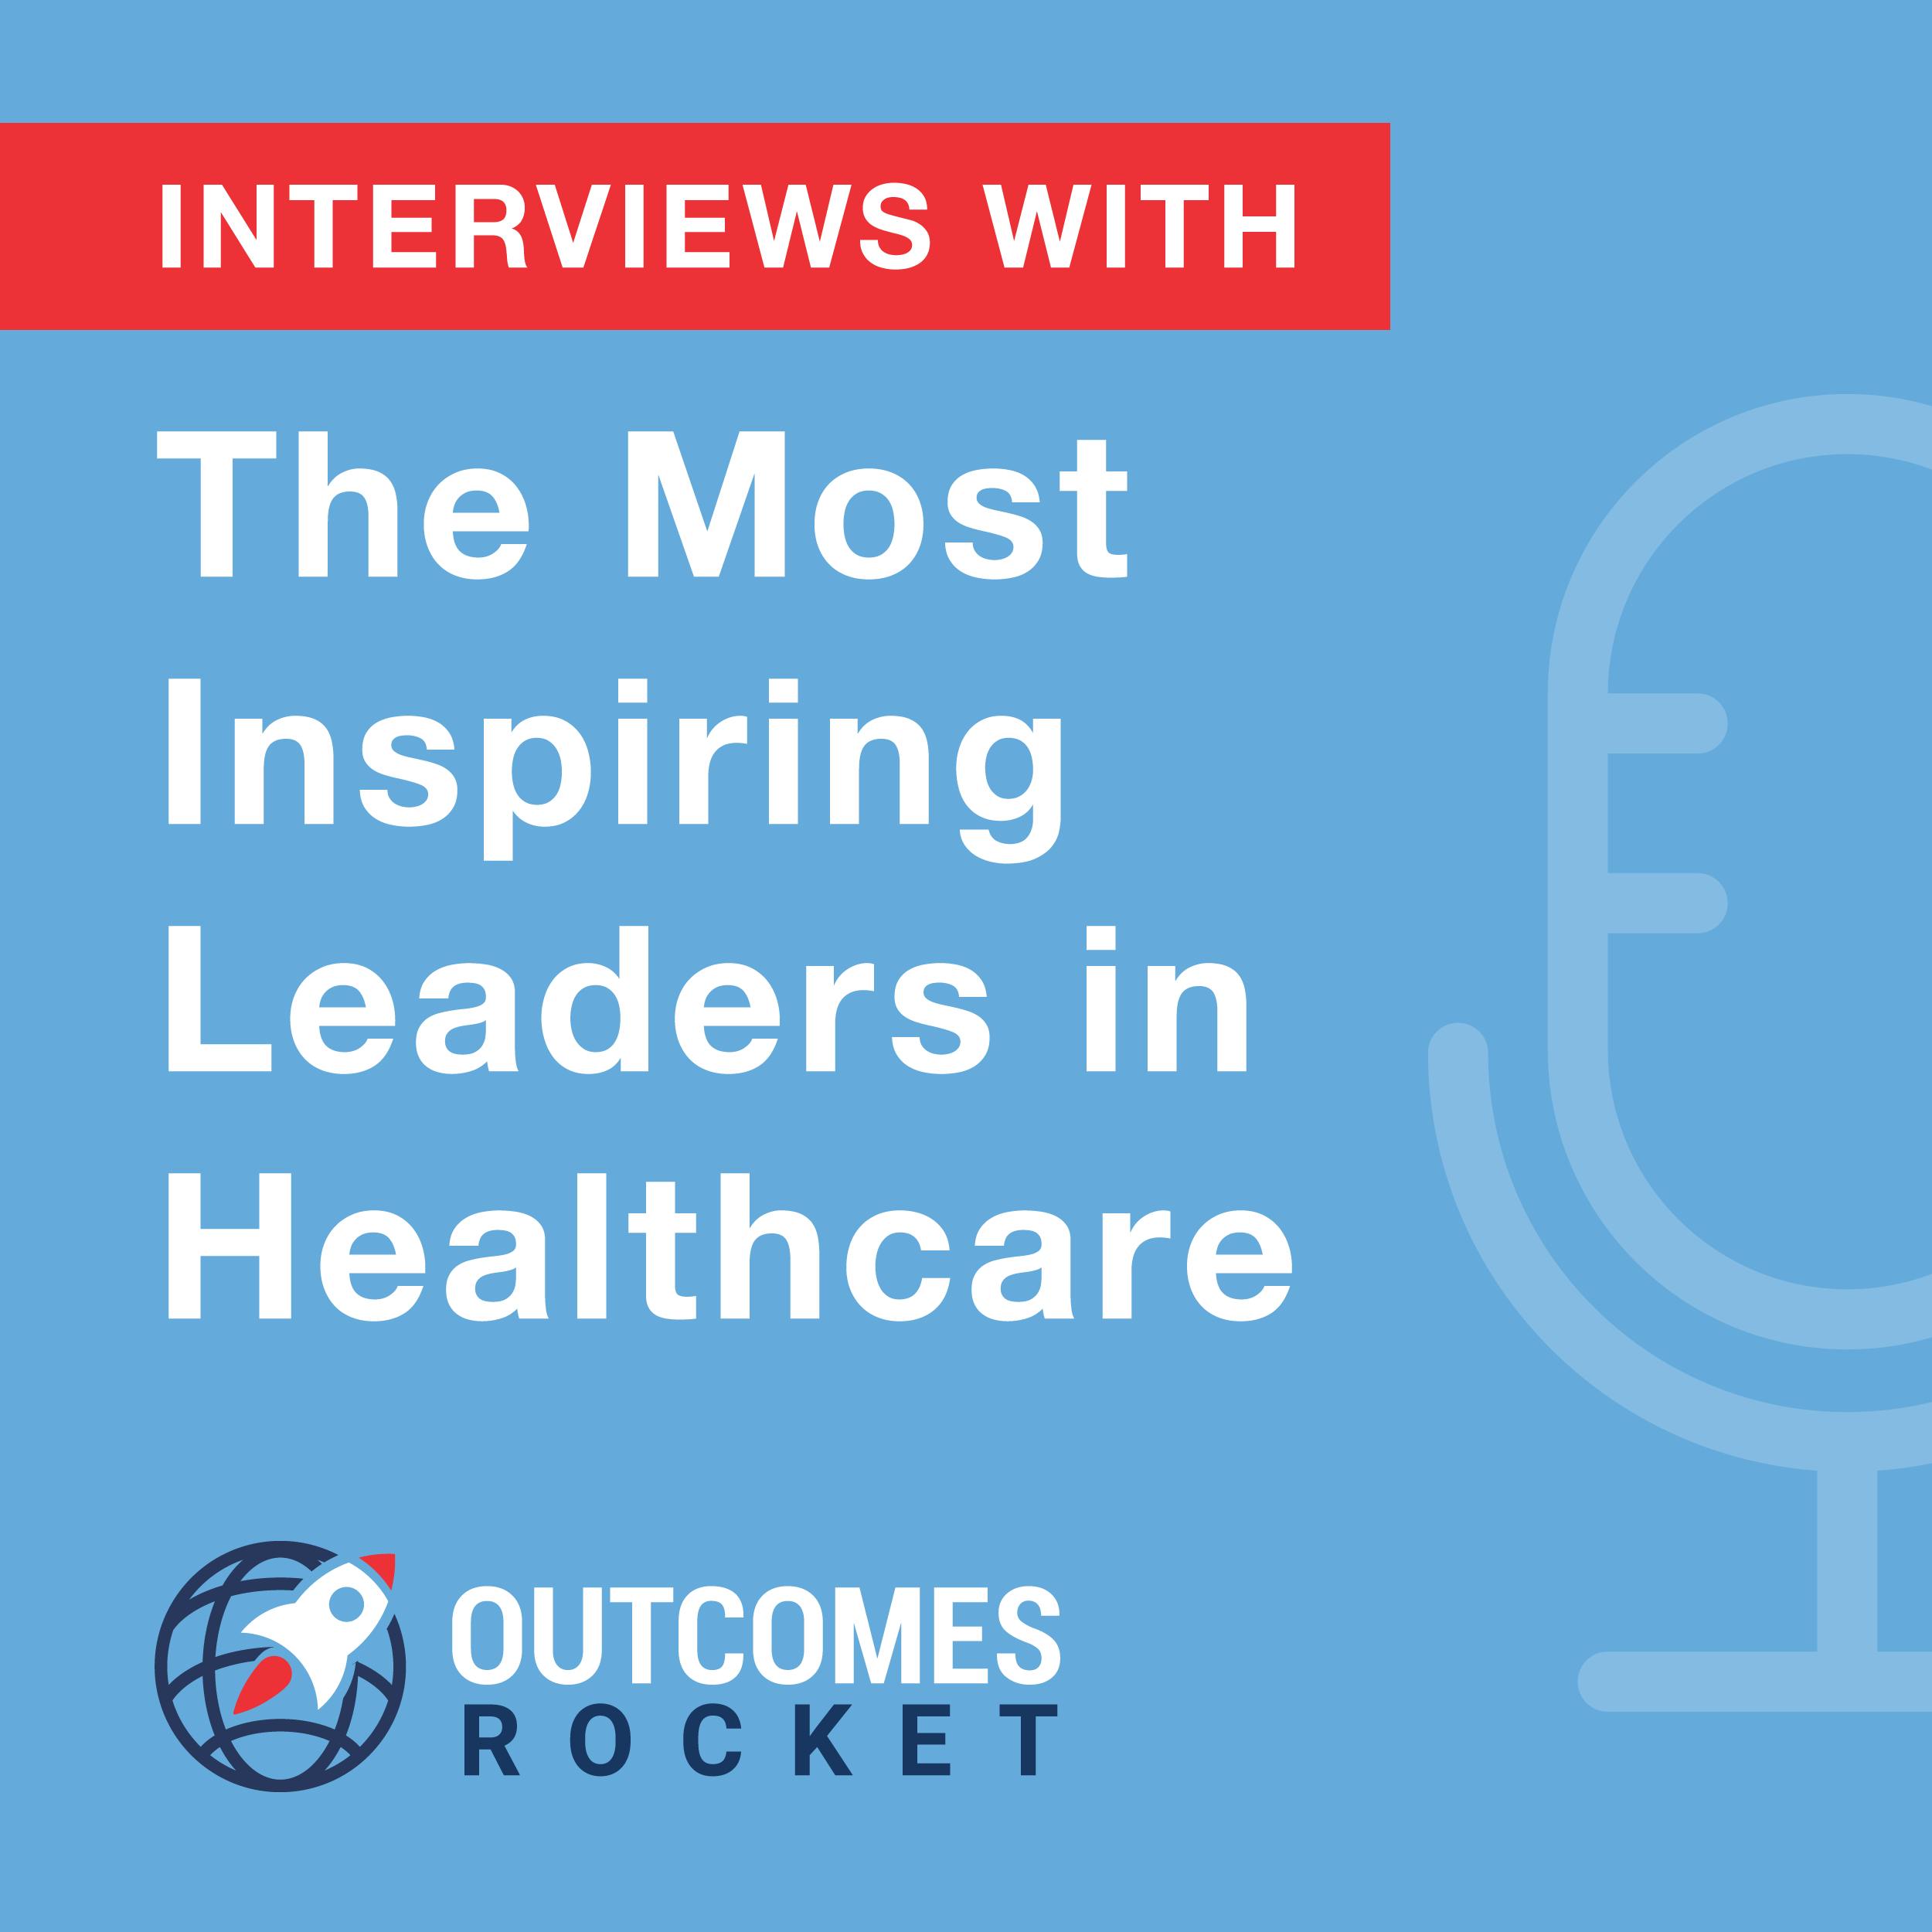 How This Team is Leveraging Alexa, Google Home and More to Transform Digital Health Capabilities with Bill Rogers, CEO at Orbita, Inc.